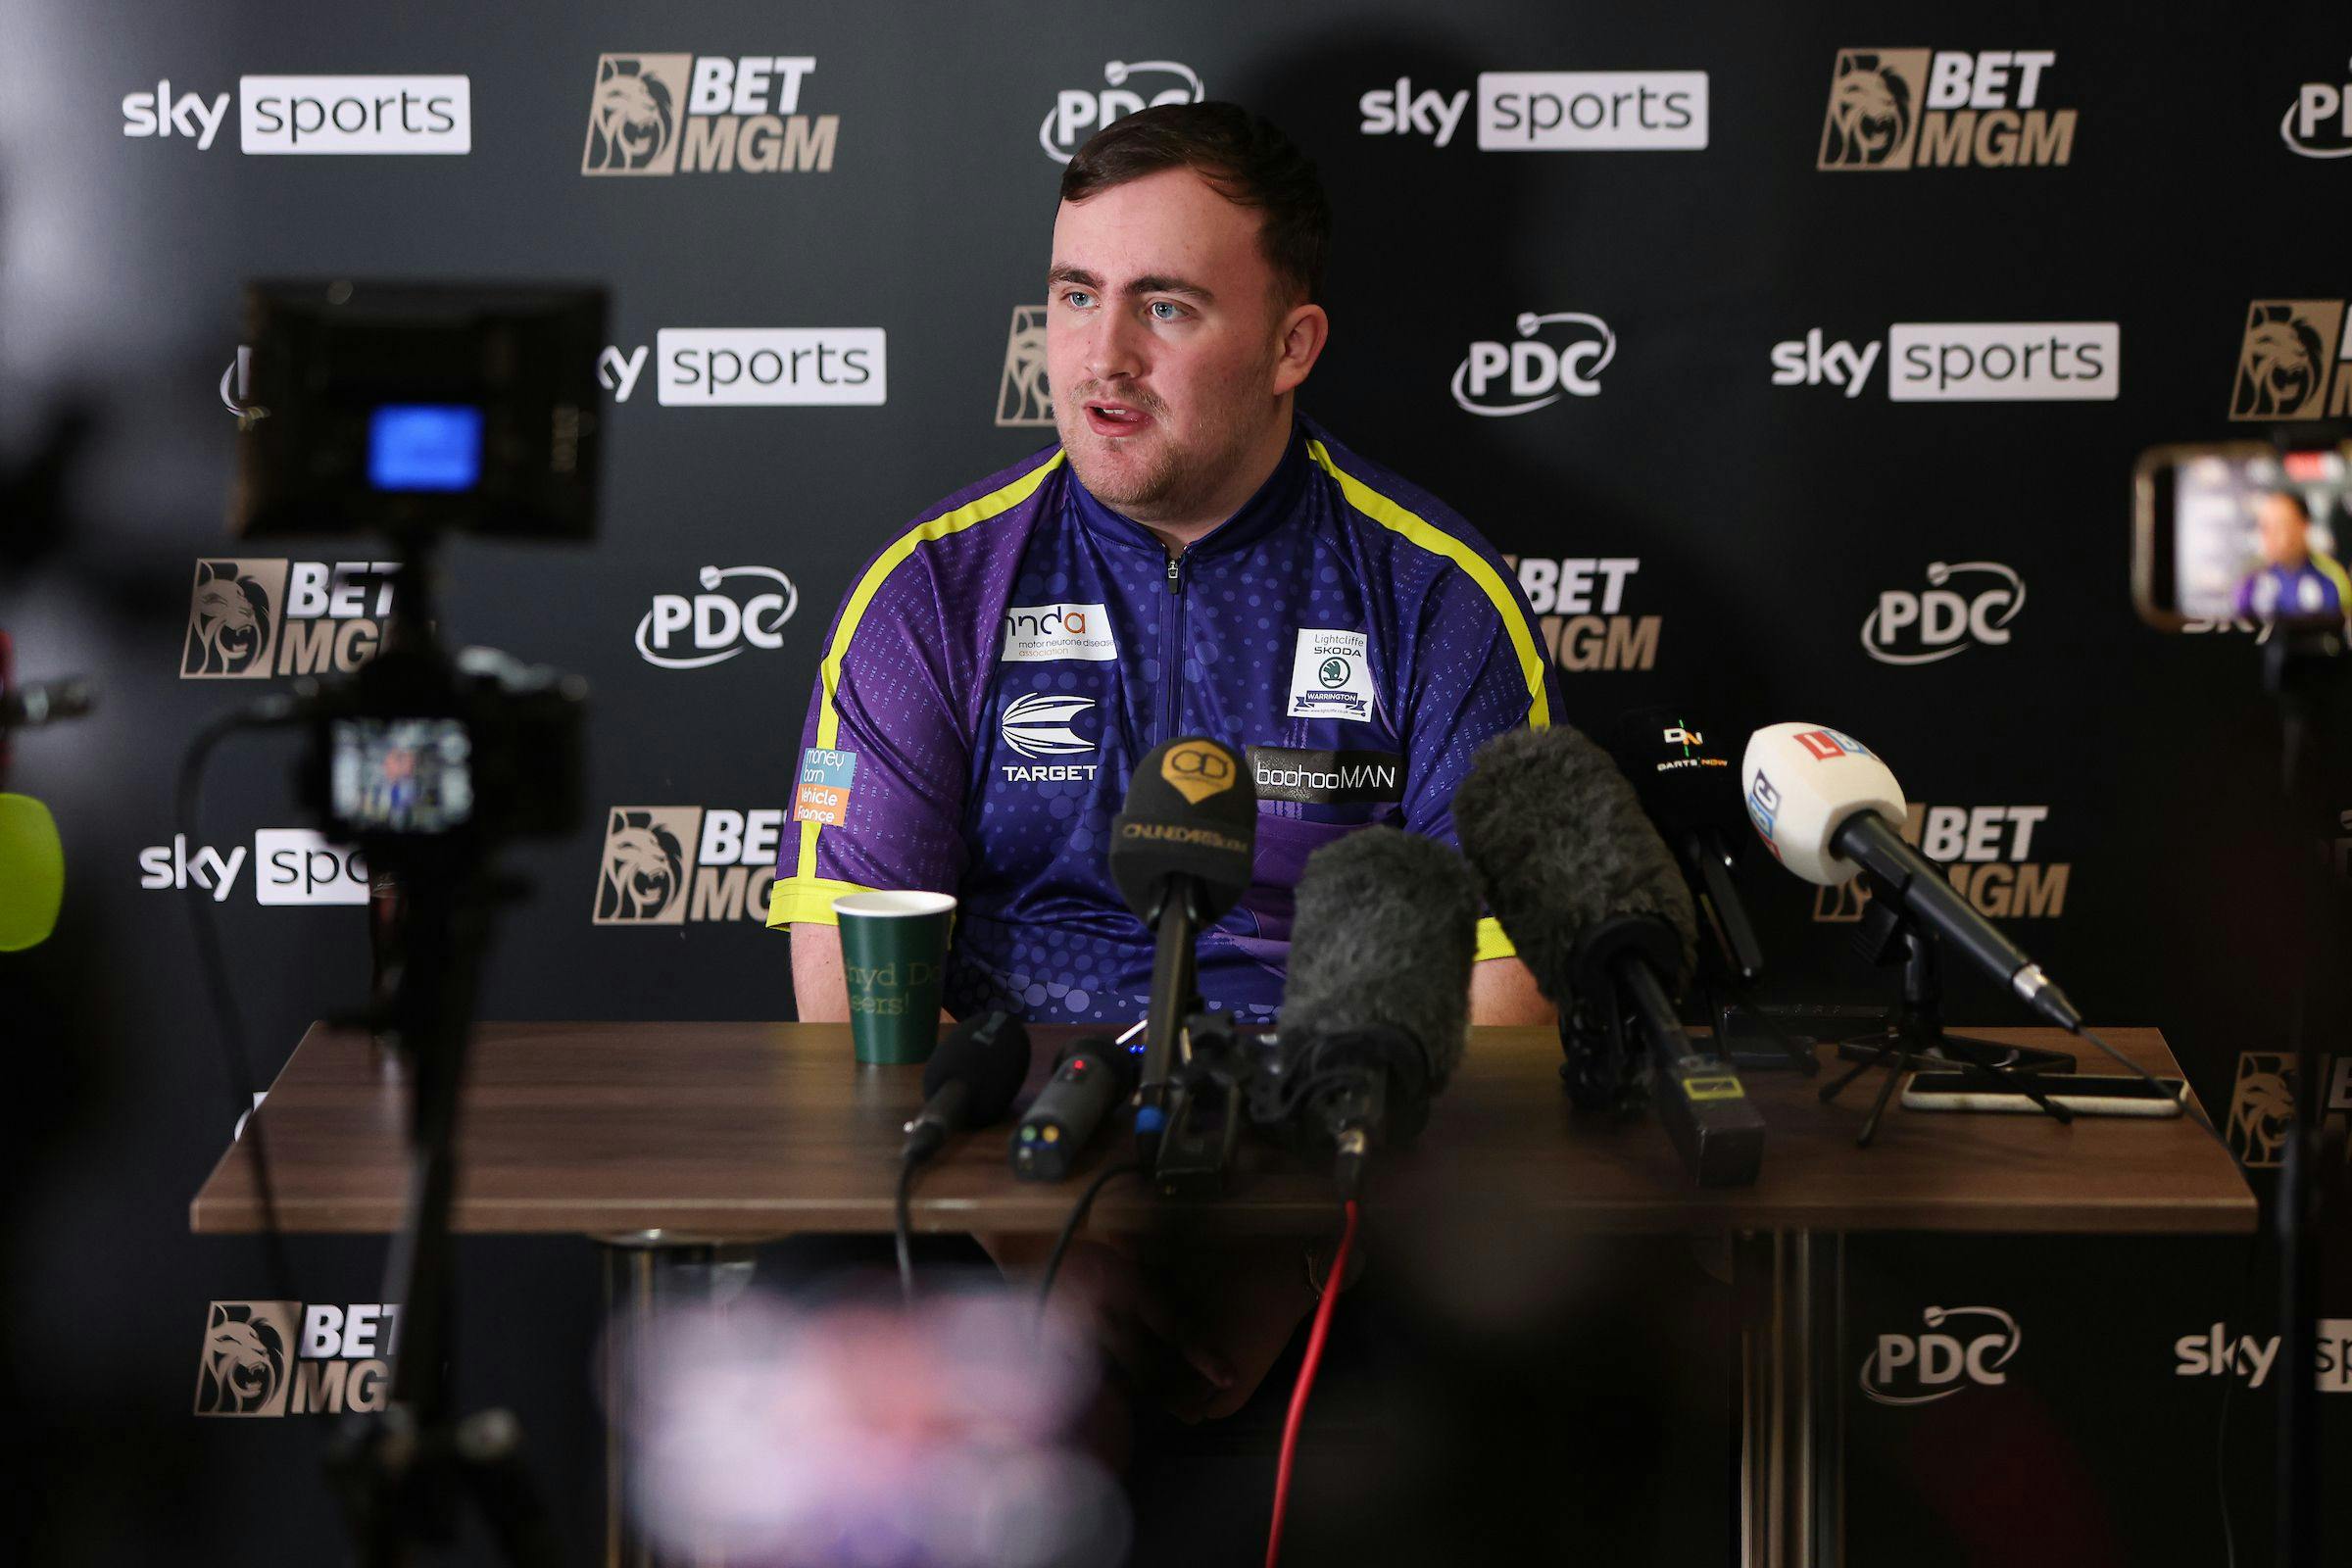 Darts player addressing a press conference 